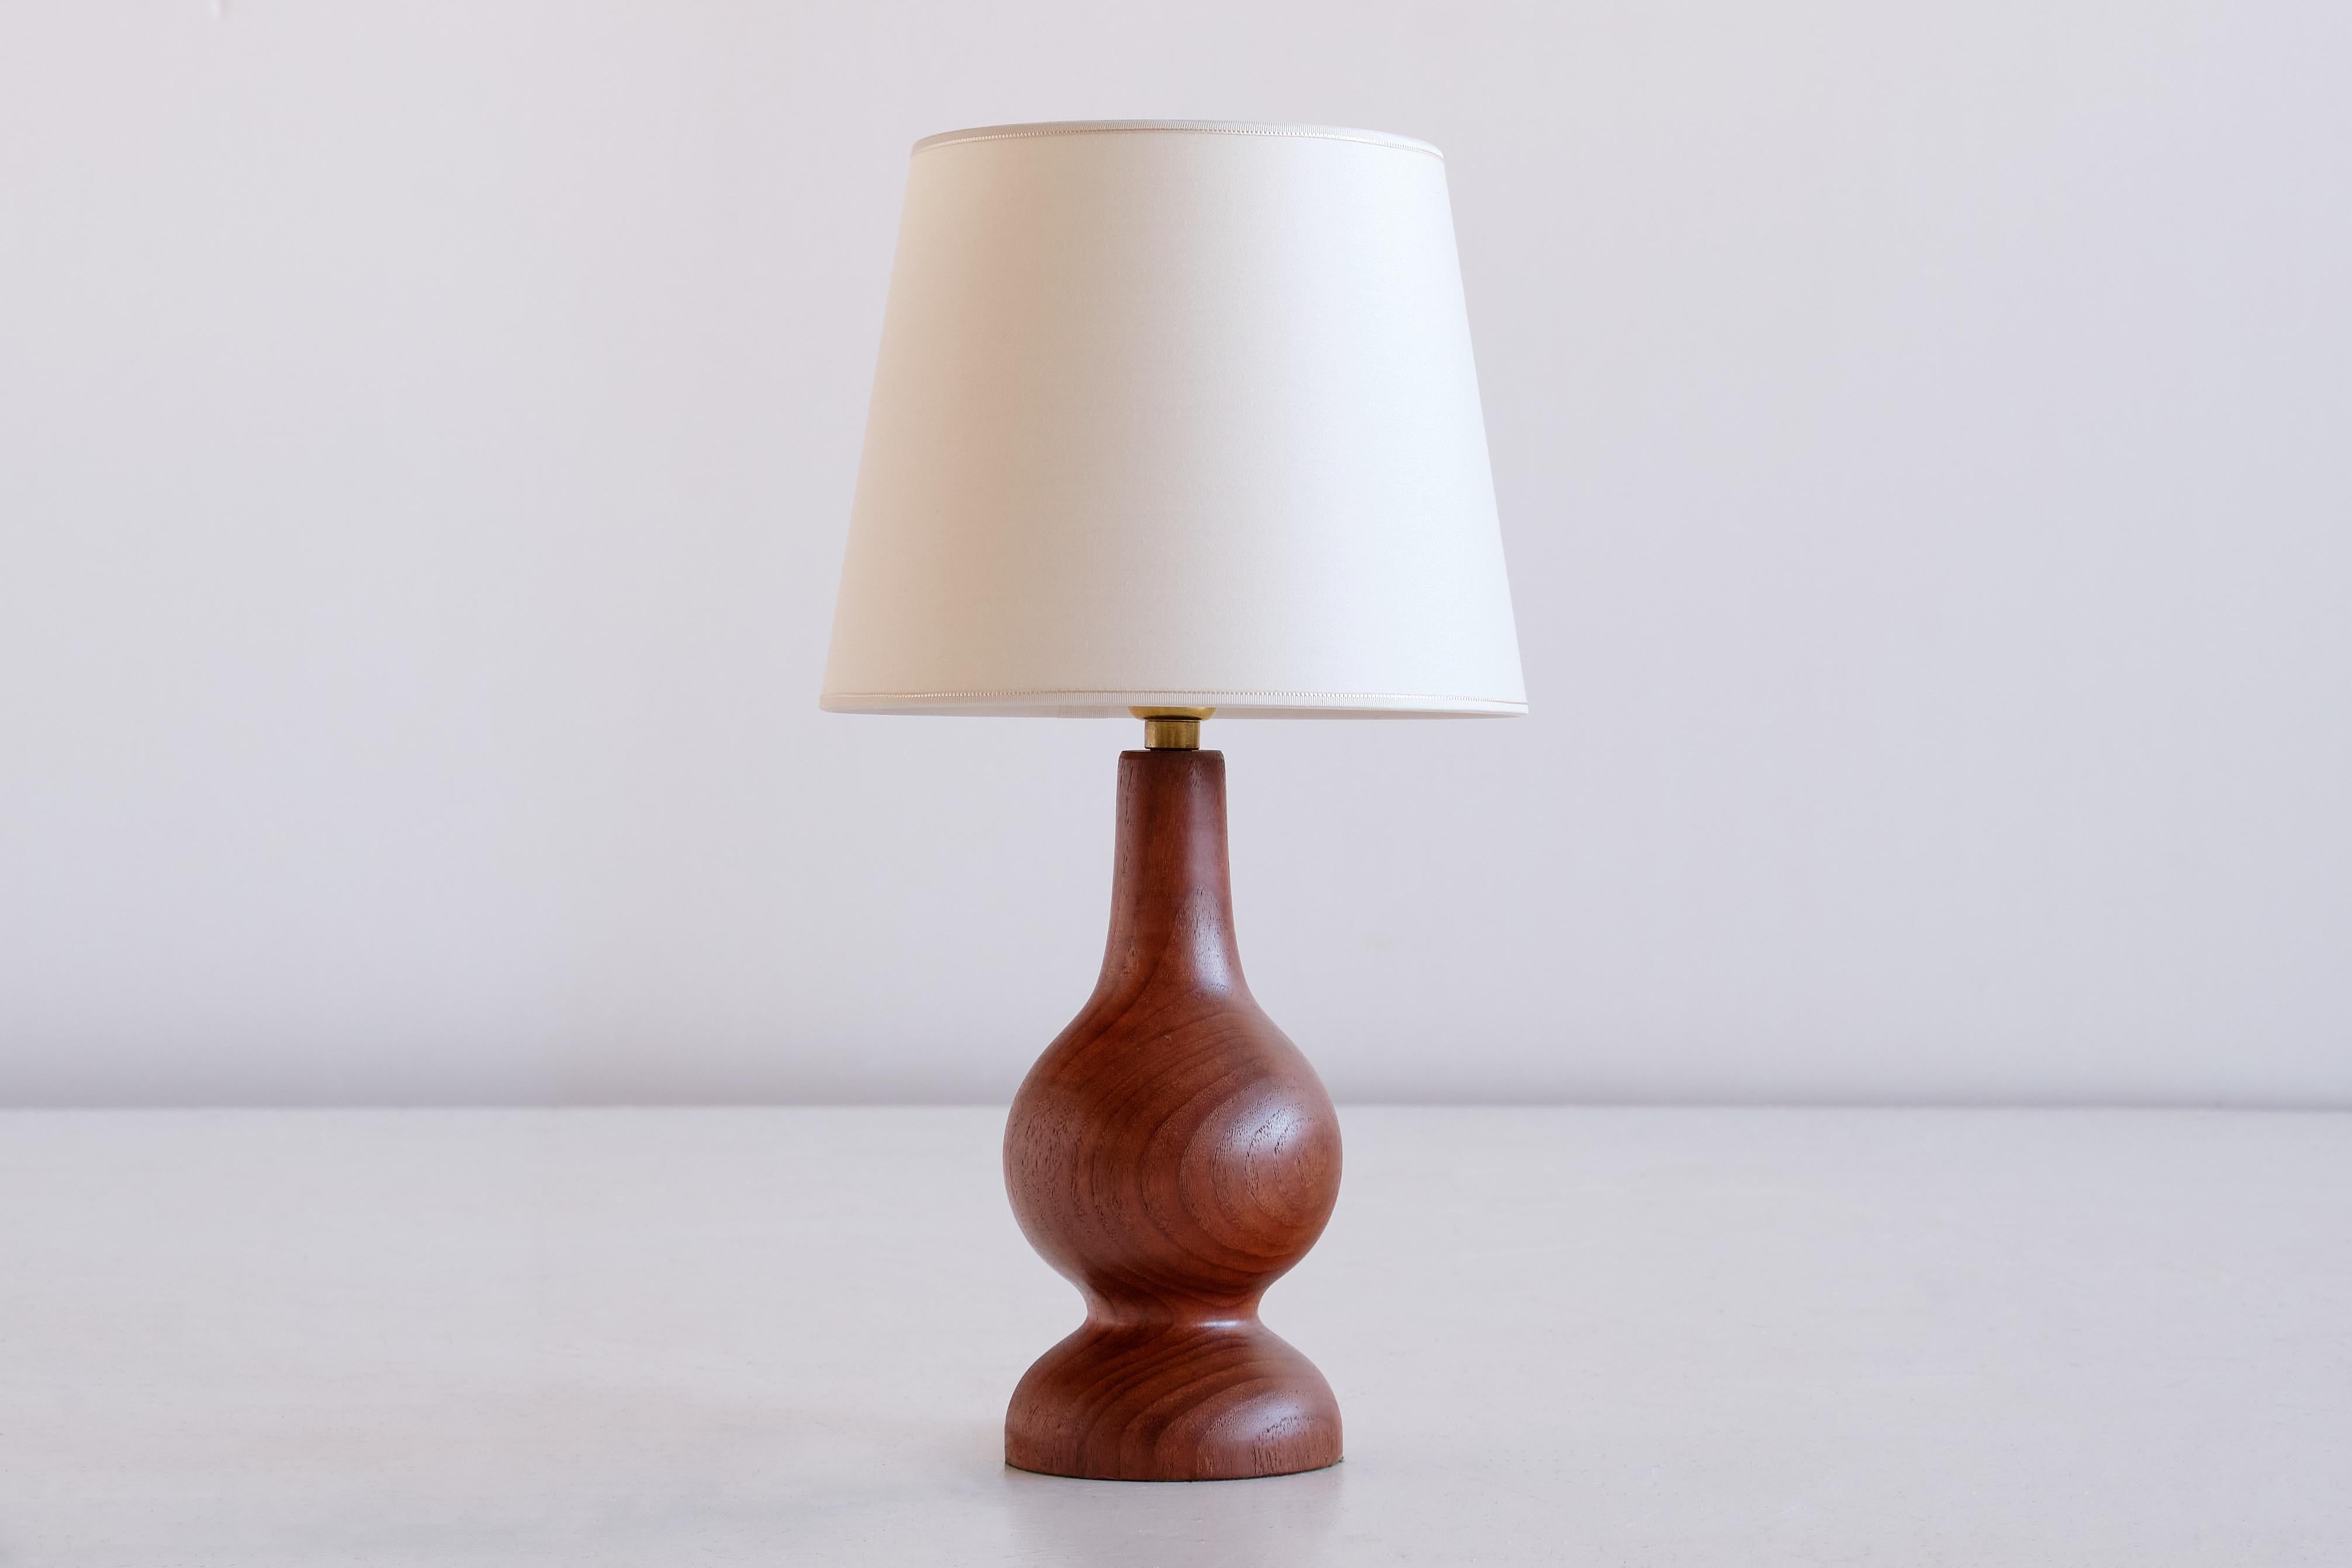 This striking table lamp was produced in Denmark in the 1960s. Sculptural organic lamp body in solid teak wood. The new tapered drum shade was custom made in an ivory matte fabric.

Rewired, new bulbholder and 220 V European plug, bayonet mount